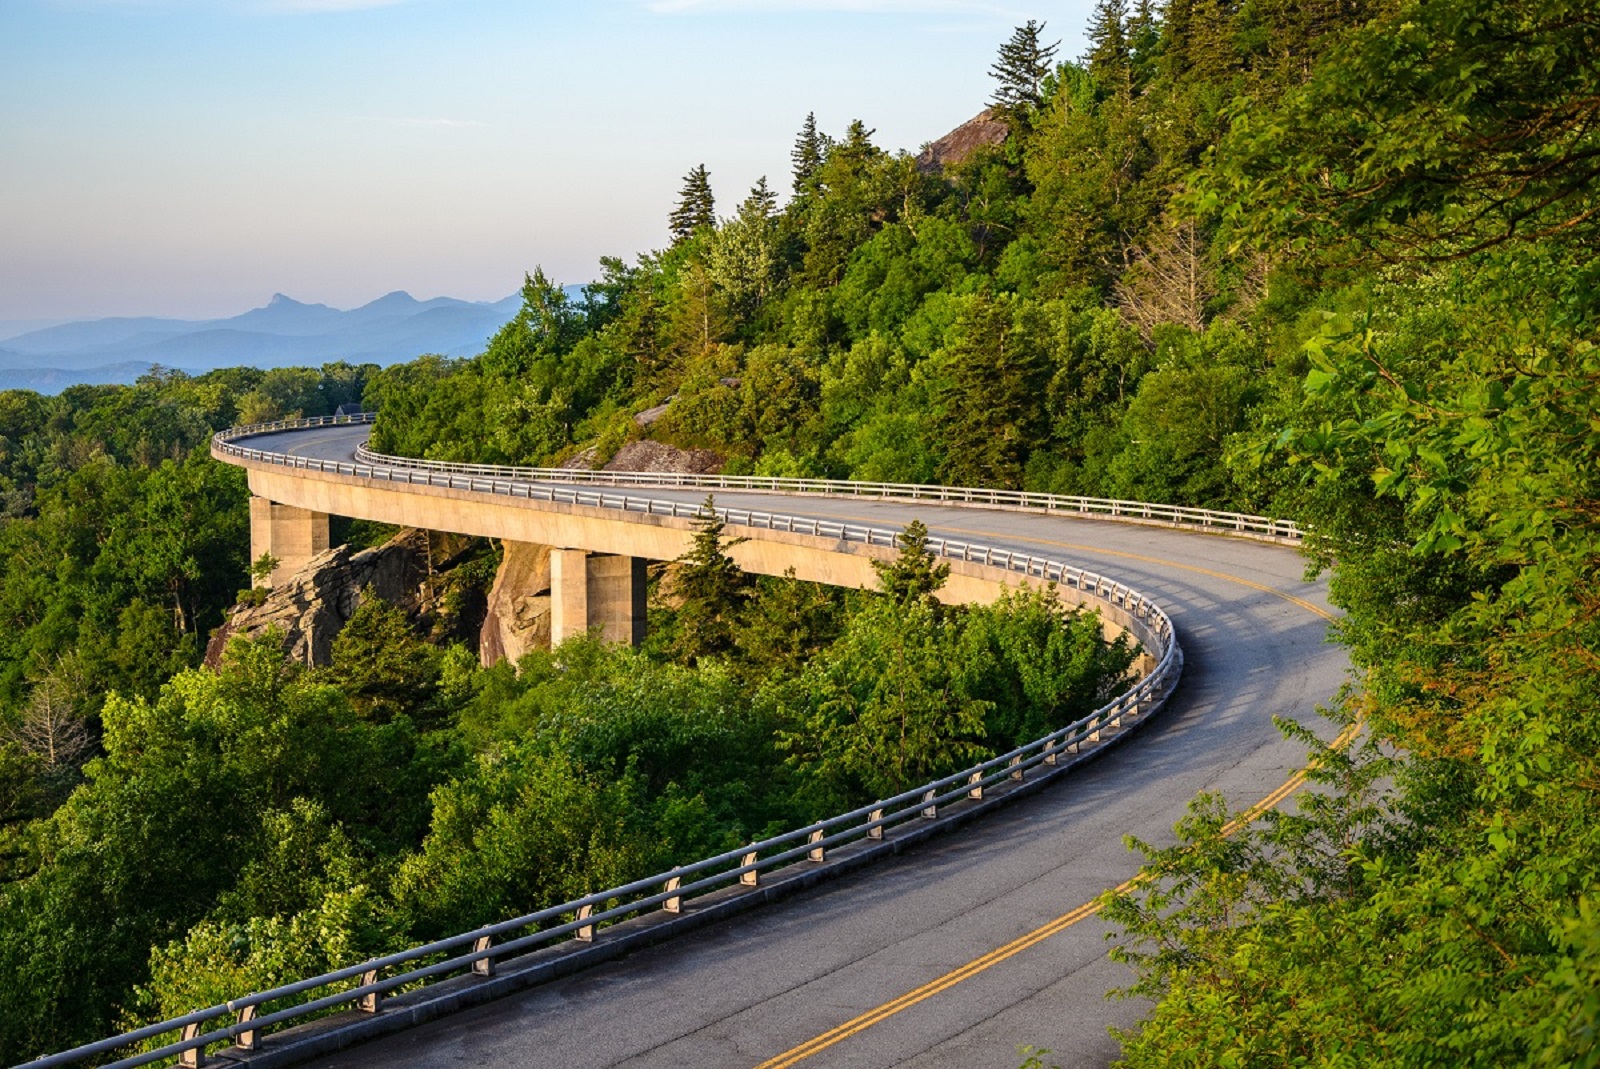 <p class="wp-caption-text">Image Credit: Shutterstock / Zack Frank</p>  <p><span>Experience the beauty of the Blue Ridge Mountains on this scenic drive through North Carolina and Virginia. With miles of twisting roads and panoramic vistas, it’s the perfect route for car enthusiasts who love a good mountain drive.</span></p>